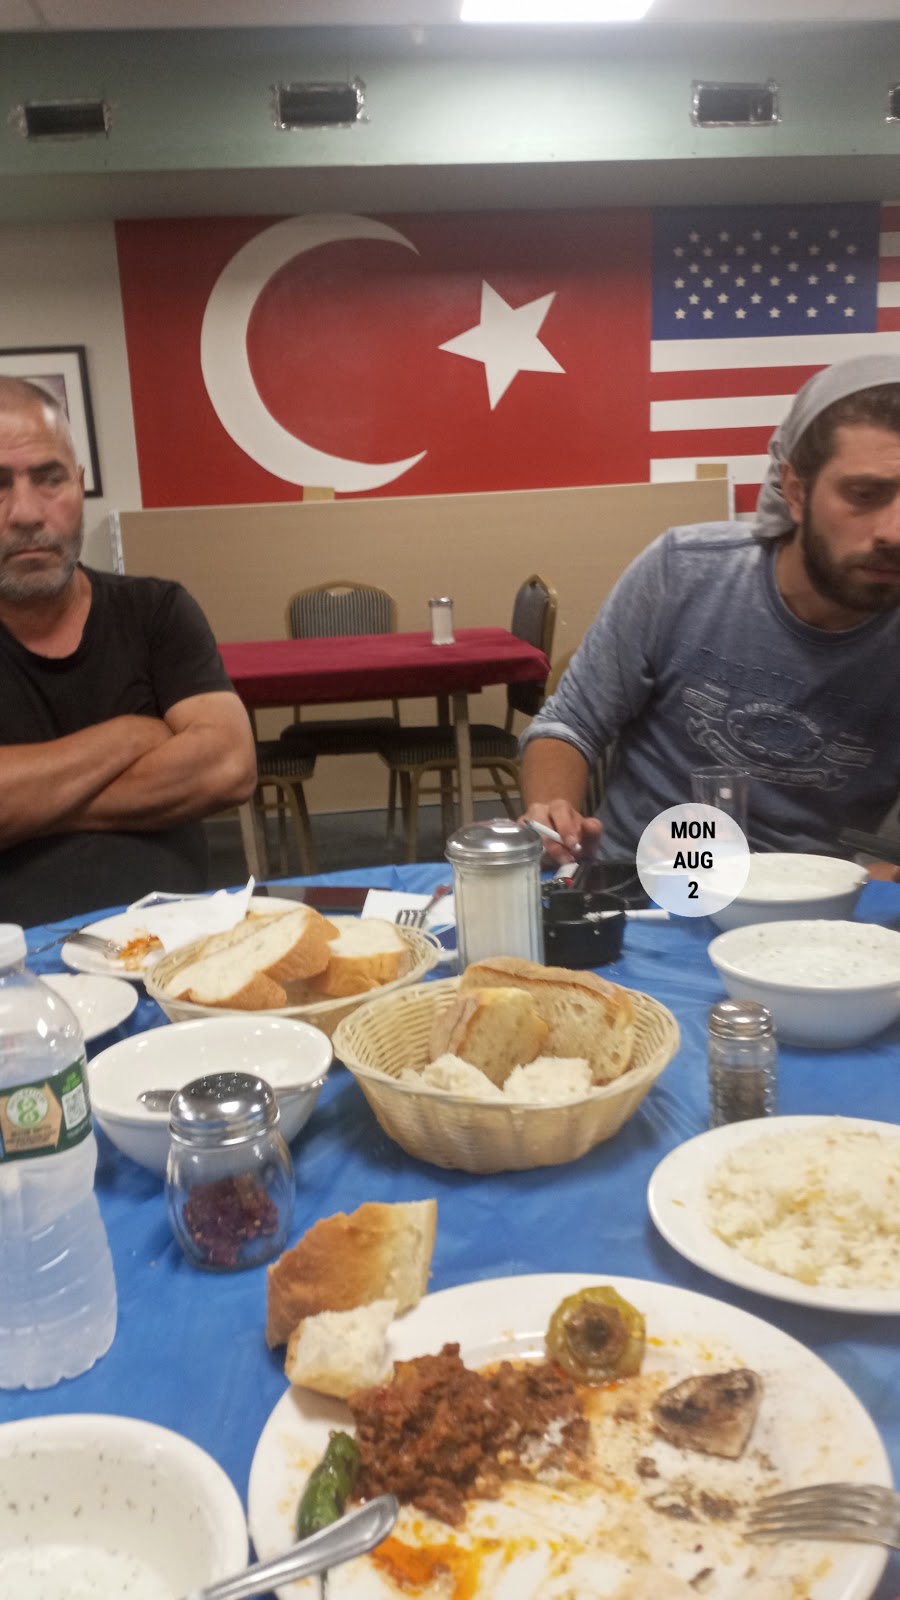 Turkish American Club Of Levittown, Pa | 1538 Haines Rd, Levittown, PA 19055 | Phone: (215) 269-1180